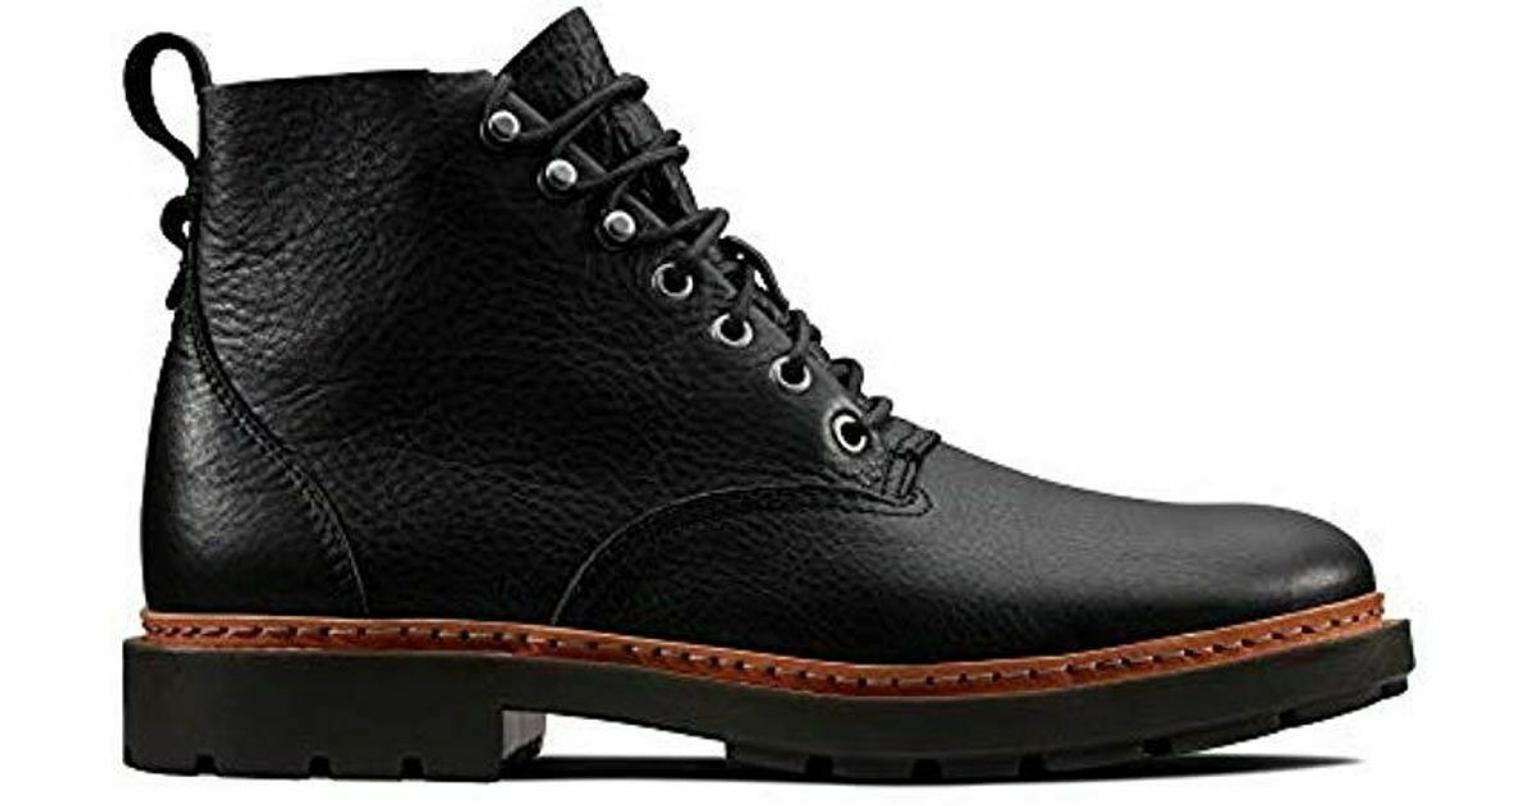 clarks boots for men